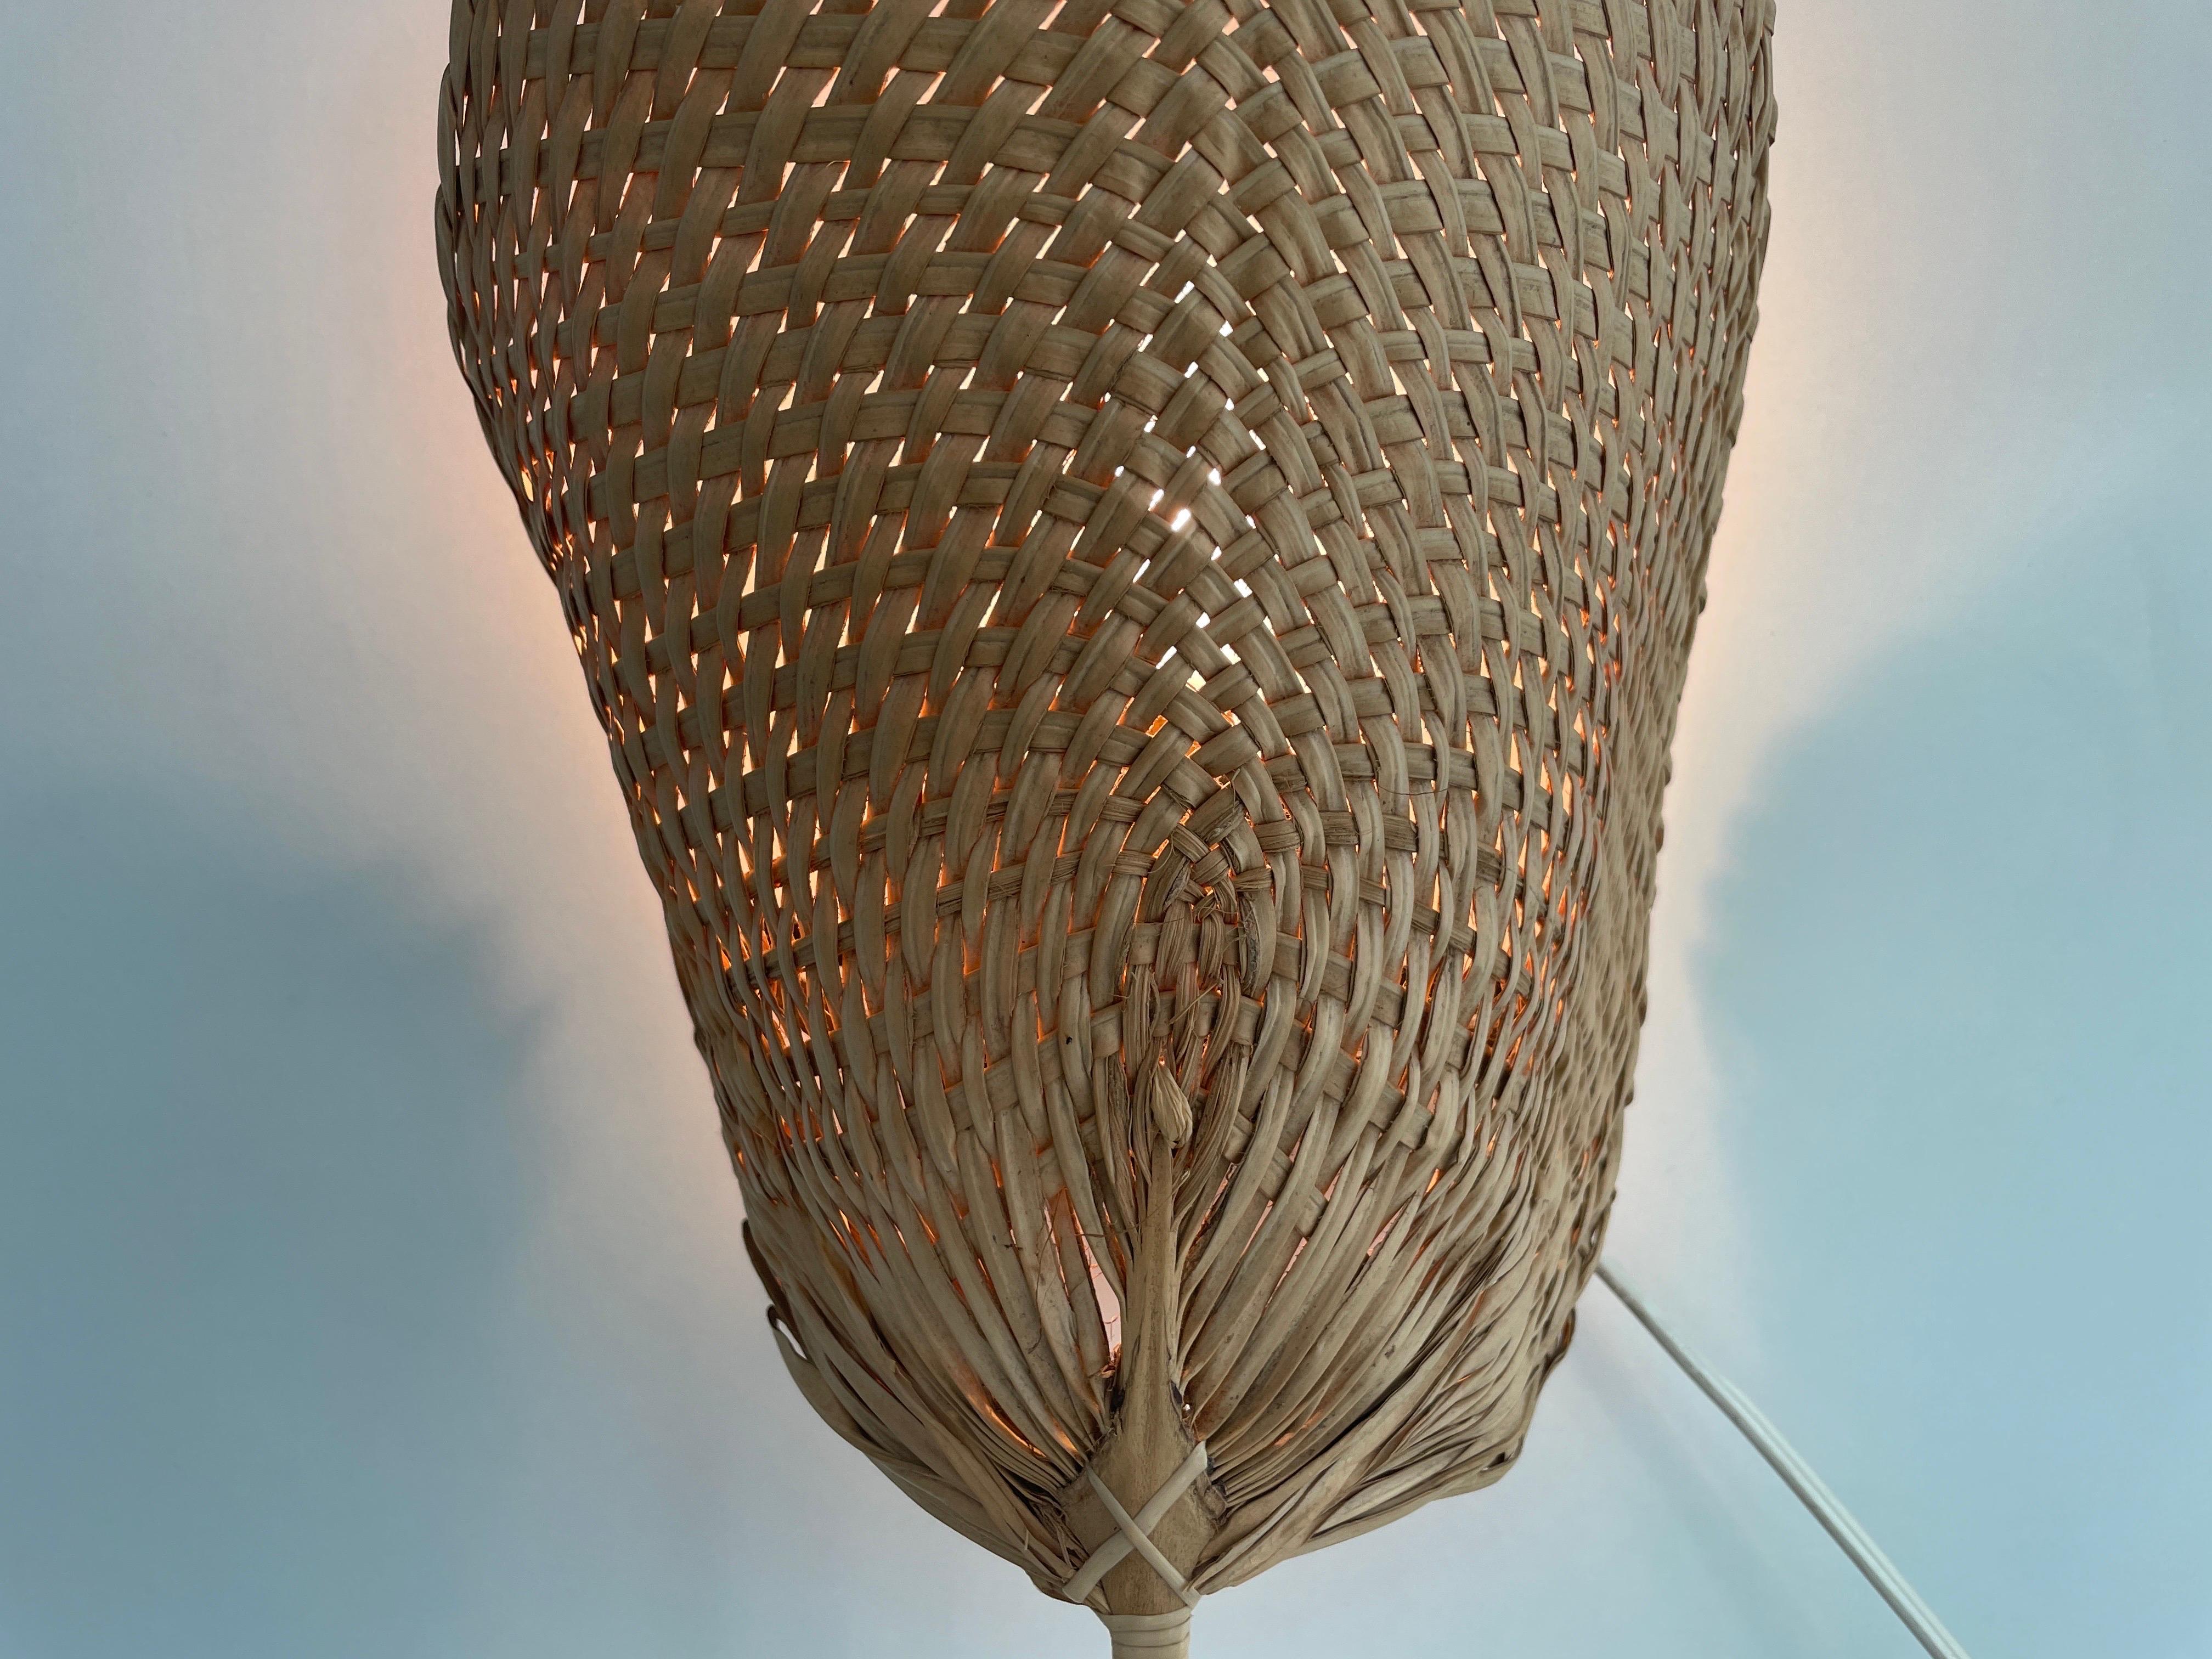 Hand-woven Wicker Palmate Leaf Design Single Sconce, 1960s, Germany For Sale 8